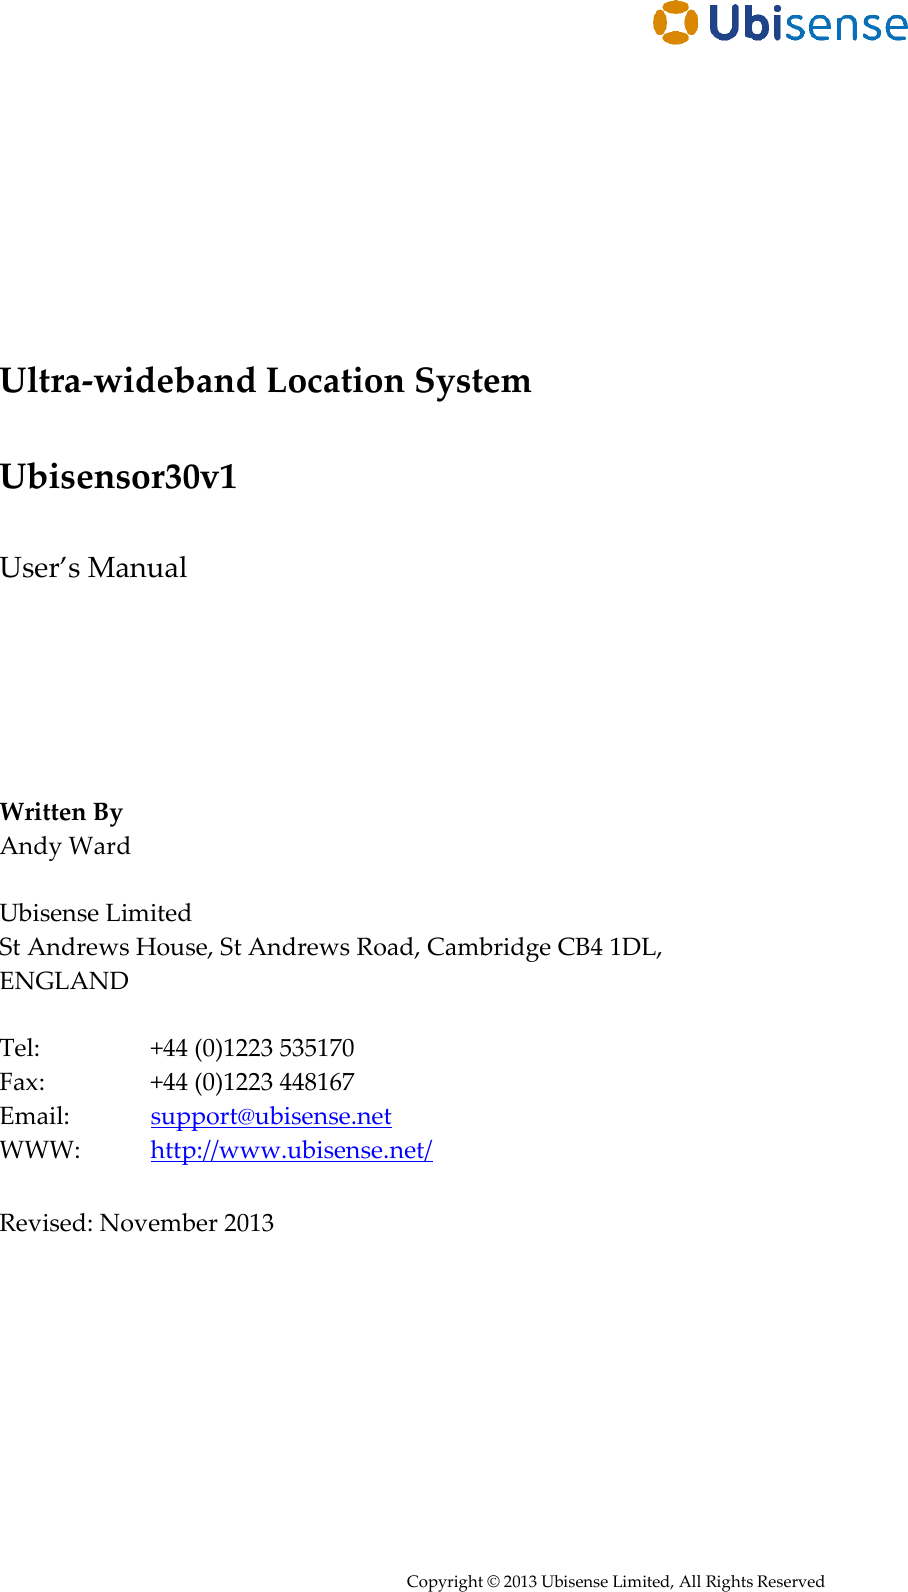     Copyright © 2013 Ubisense Limited, All Rights Reserved           Ultra-wideband Location System  Ubisensor30v1  User’s Manual       Written By Andy Ward  Ubisense Limited St Andrews House, St Andrews Road, Cambridge CB4 1DL, ENGLAND  Tel:     +44 (0)1223 535170 Fax:     +44 (0)1223 448167 Email:    support@ubisense.net WWW:   http://www.ubisense.net/  Revised: November 2013  